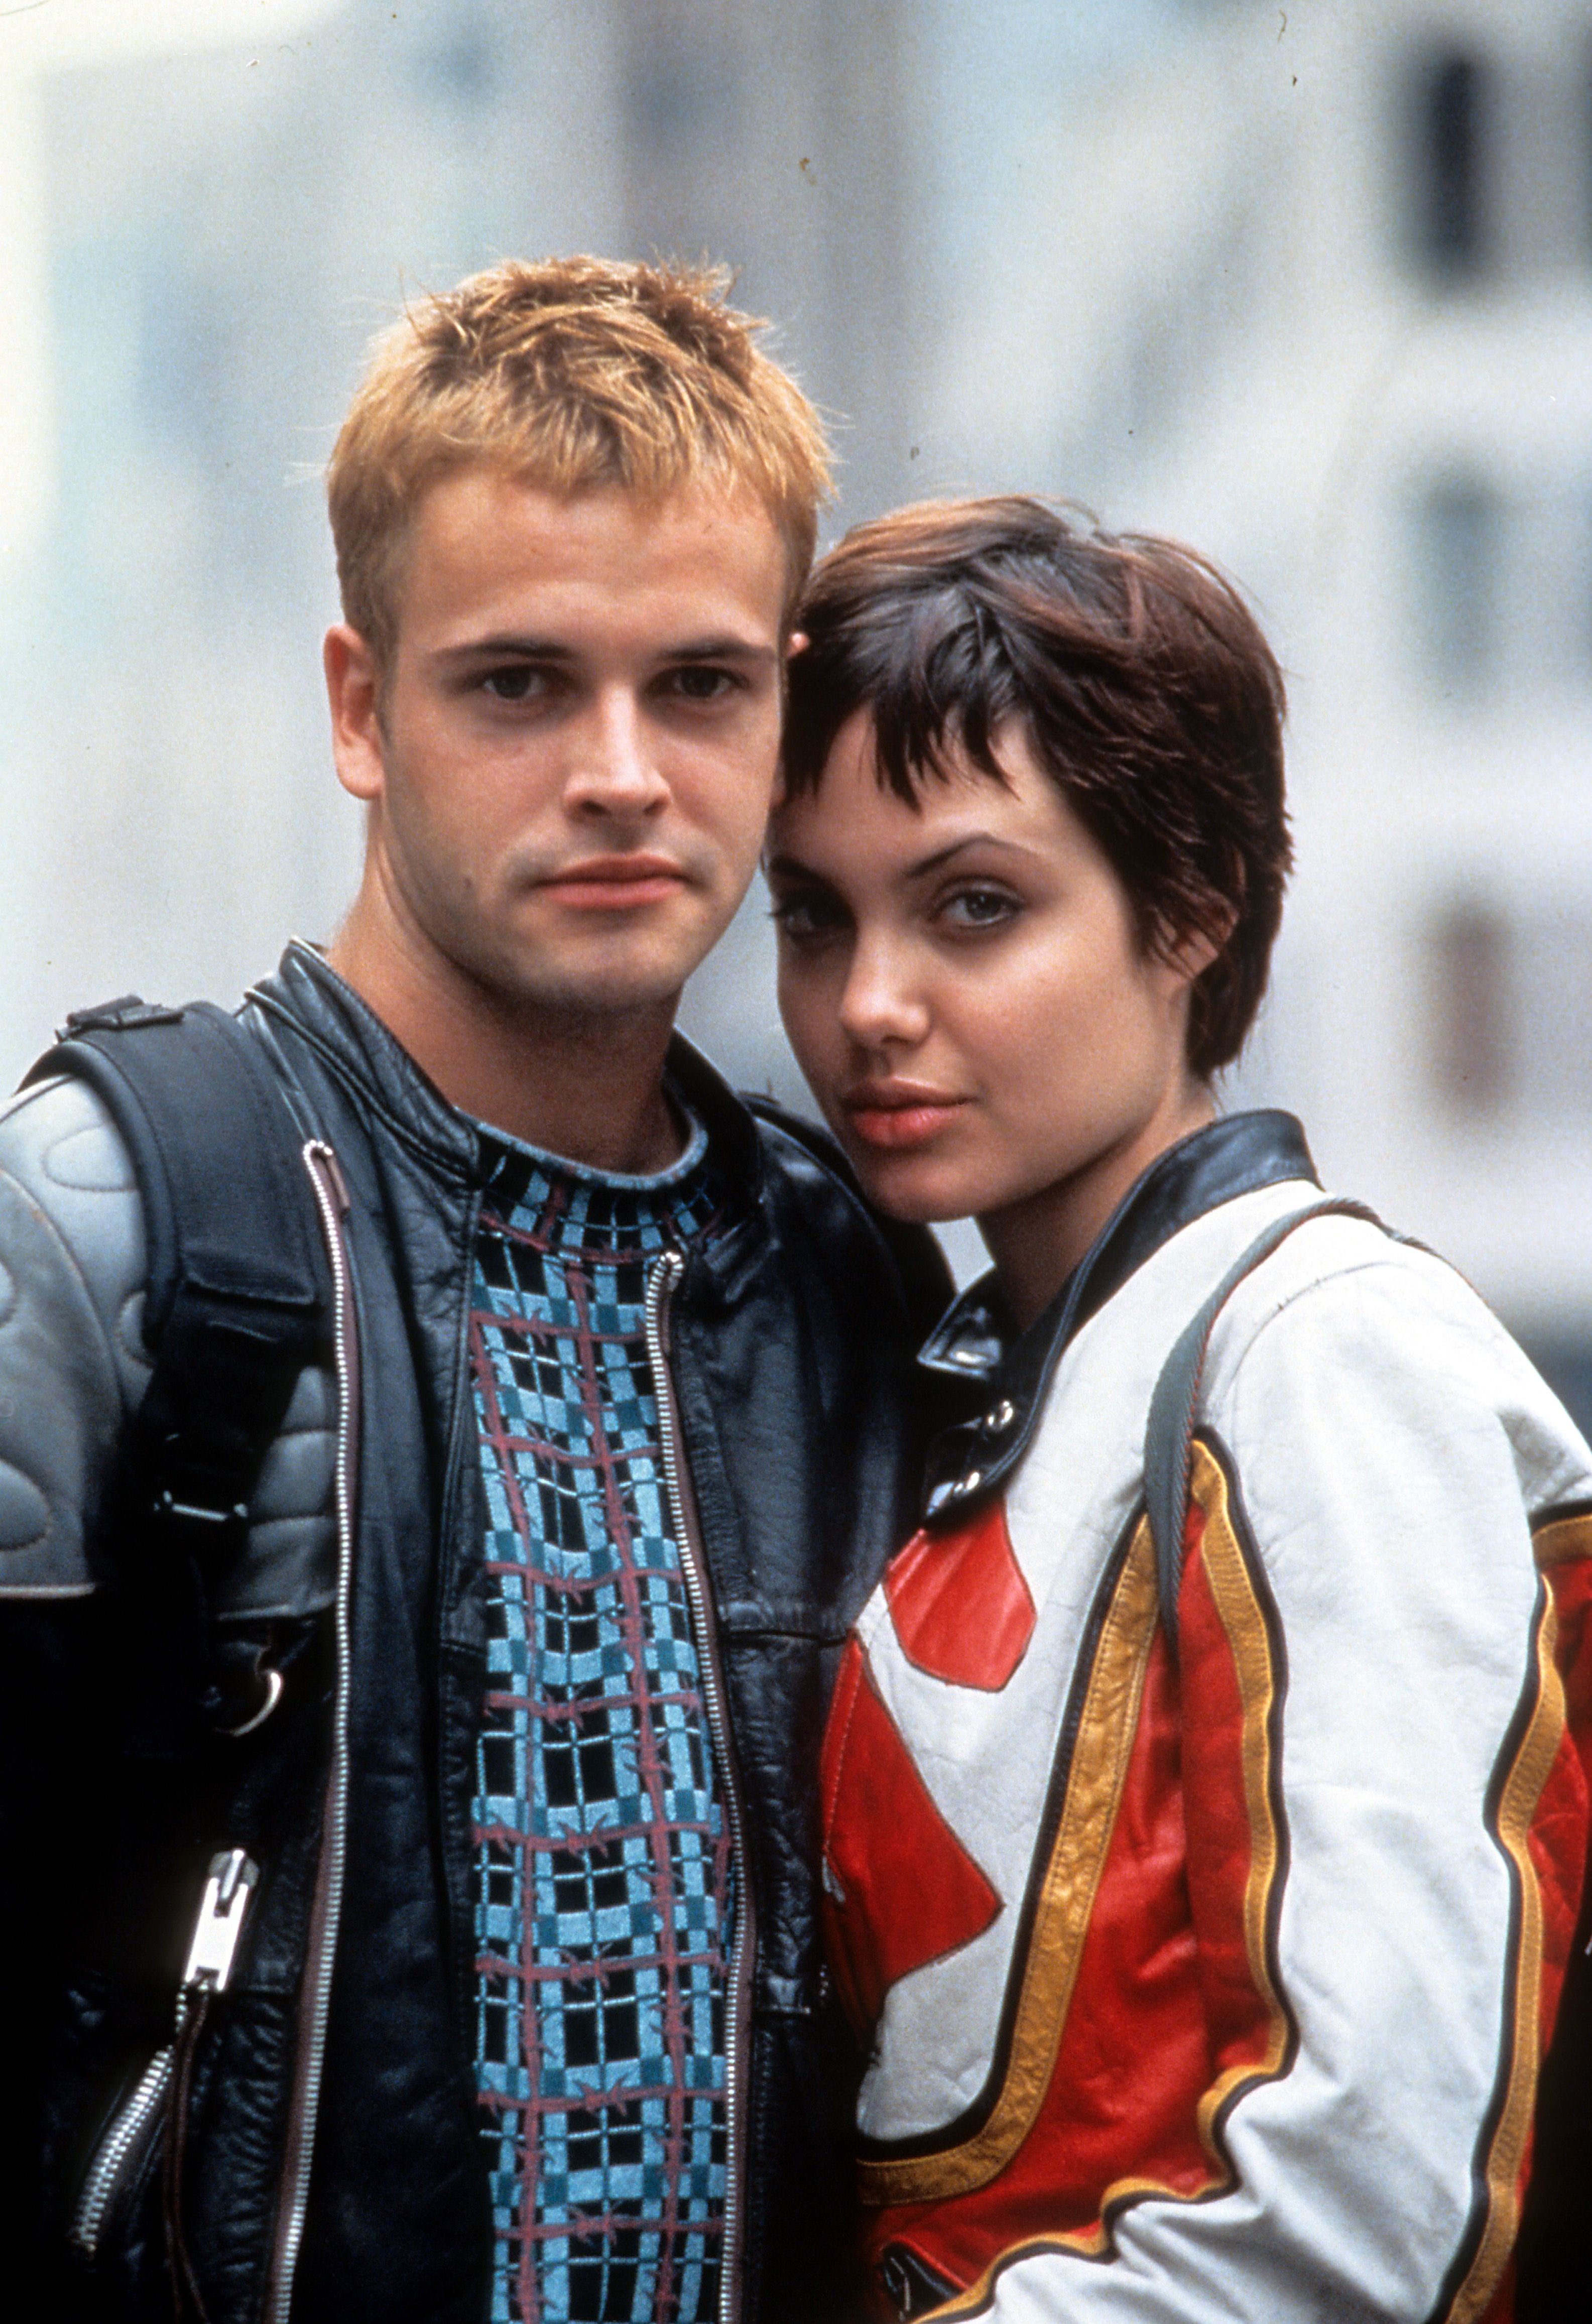 Jonny Lee Miller shares his vows with actress Angelina Jolie on 28 March 1996.